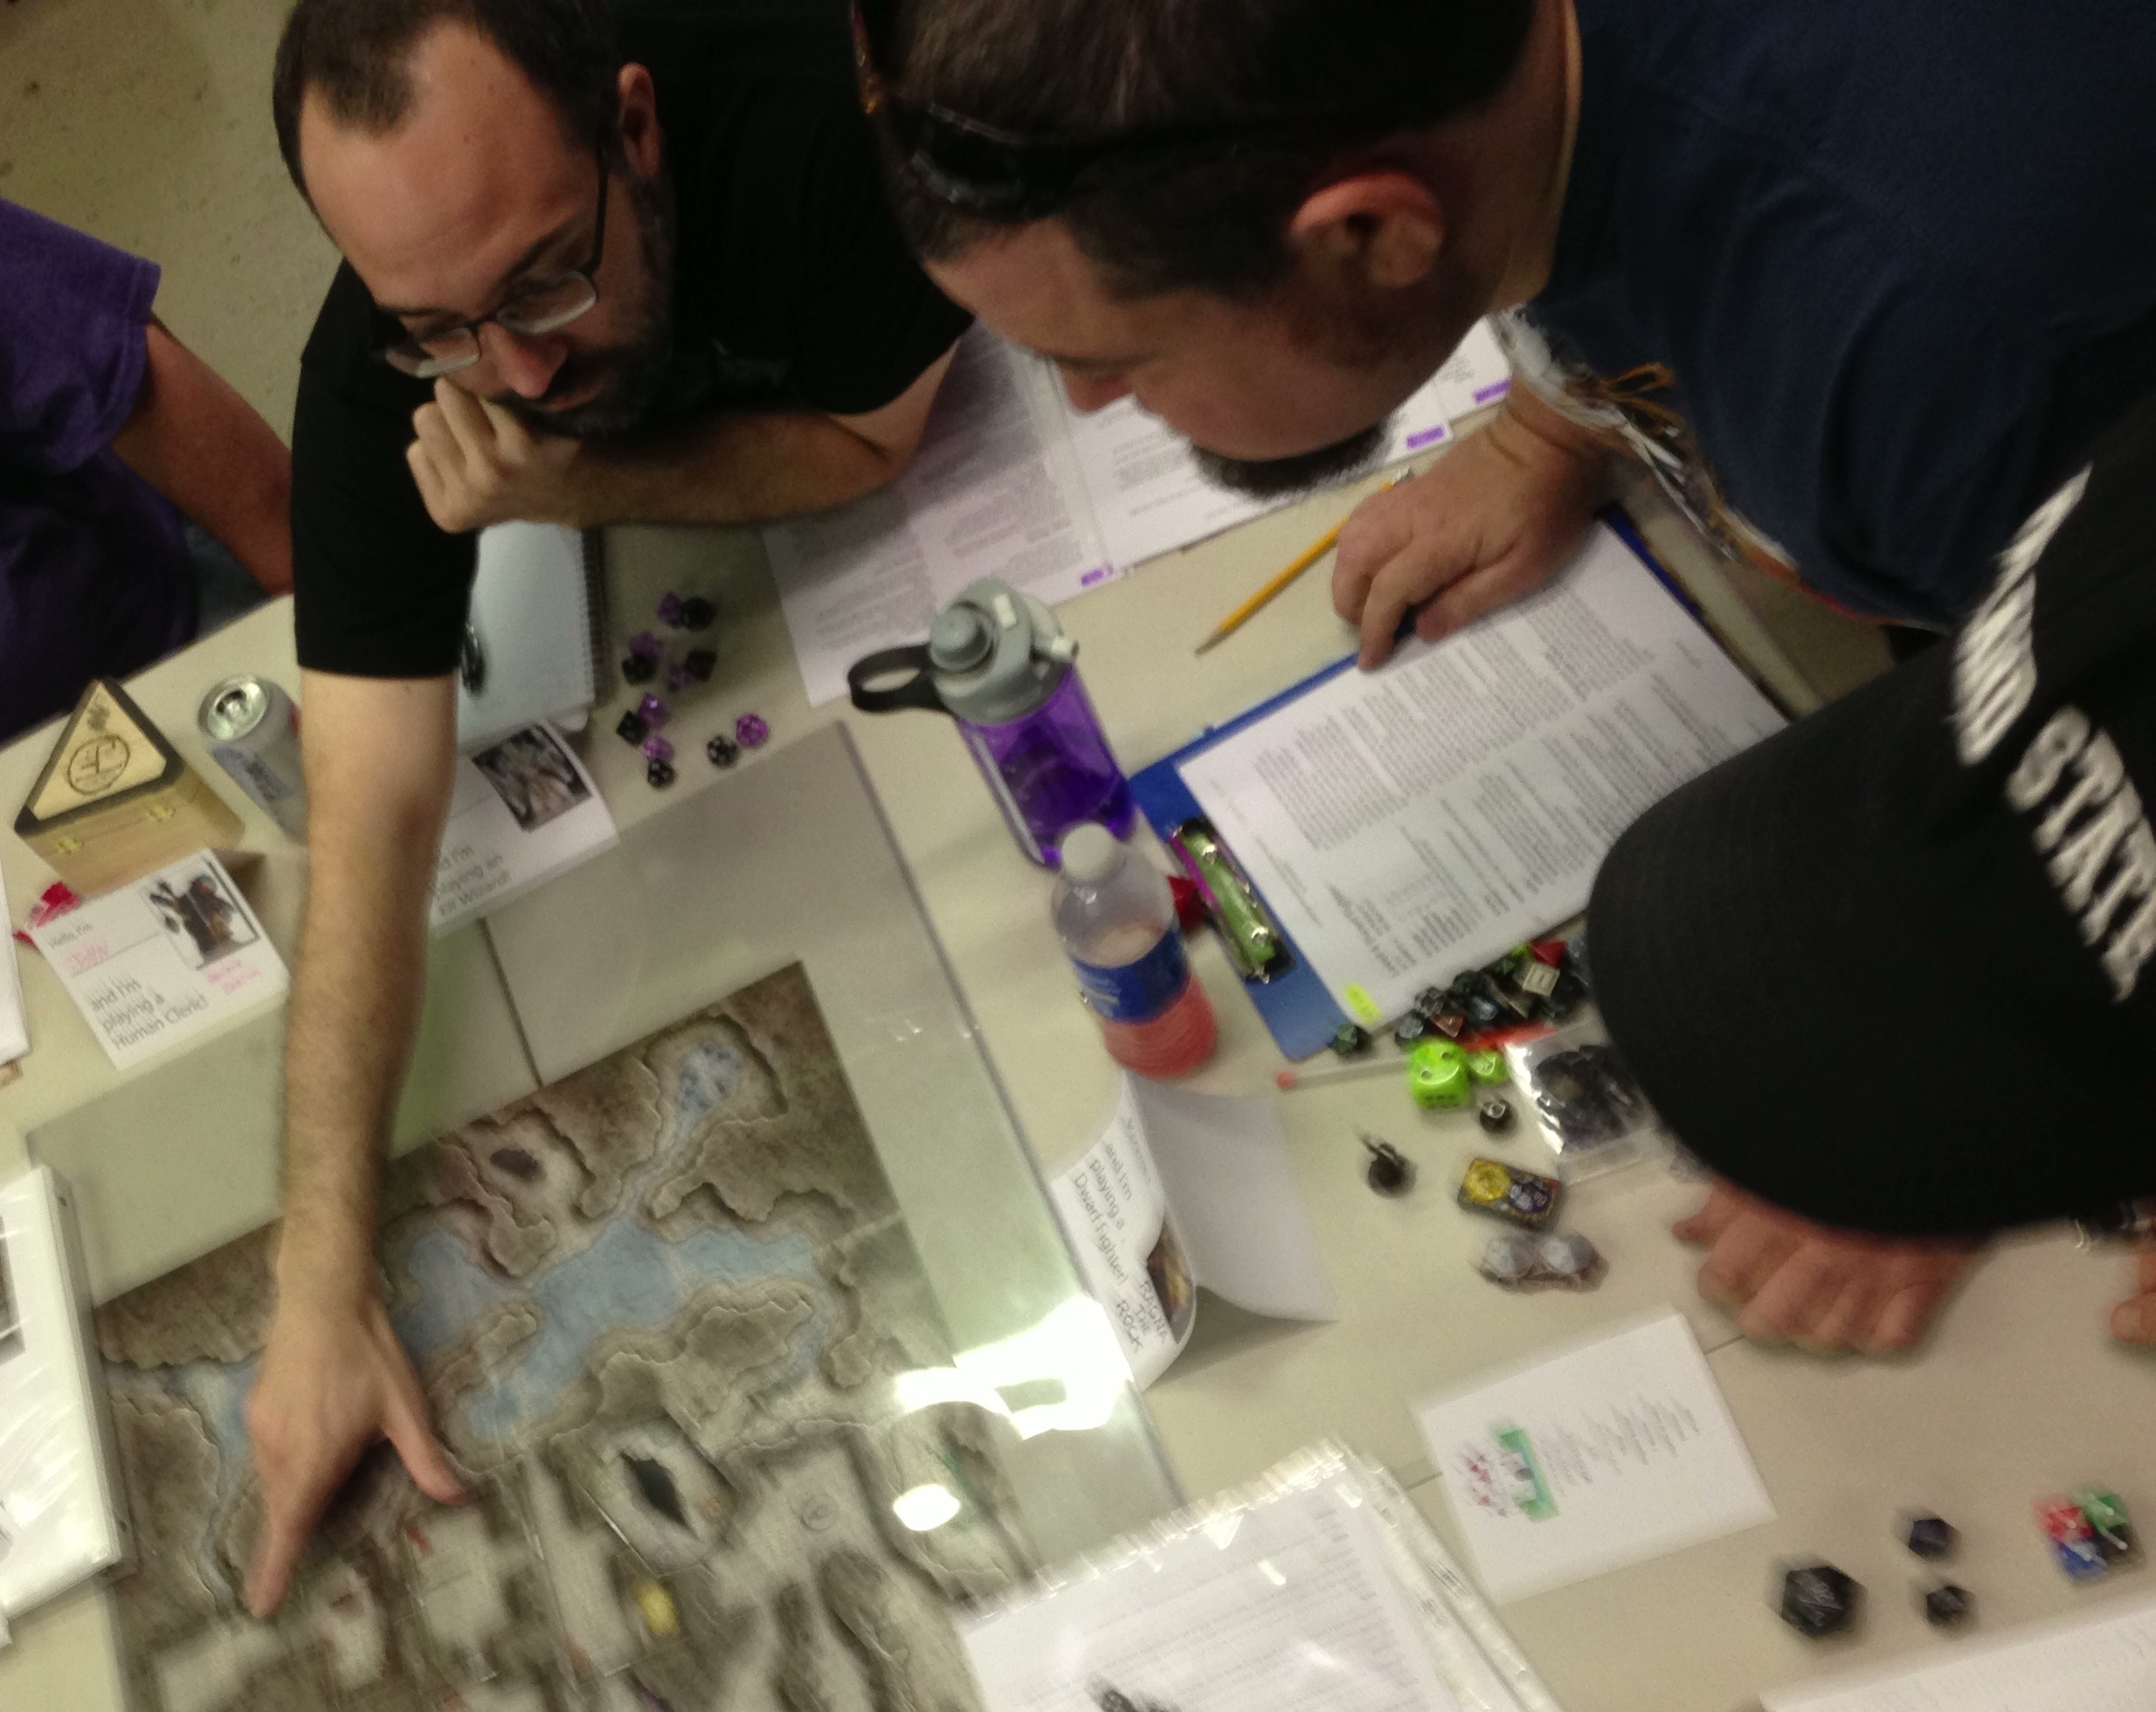 Players in the Vault of the Dracolich game